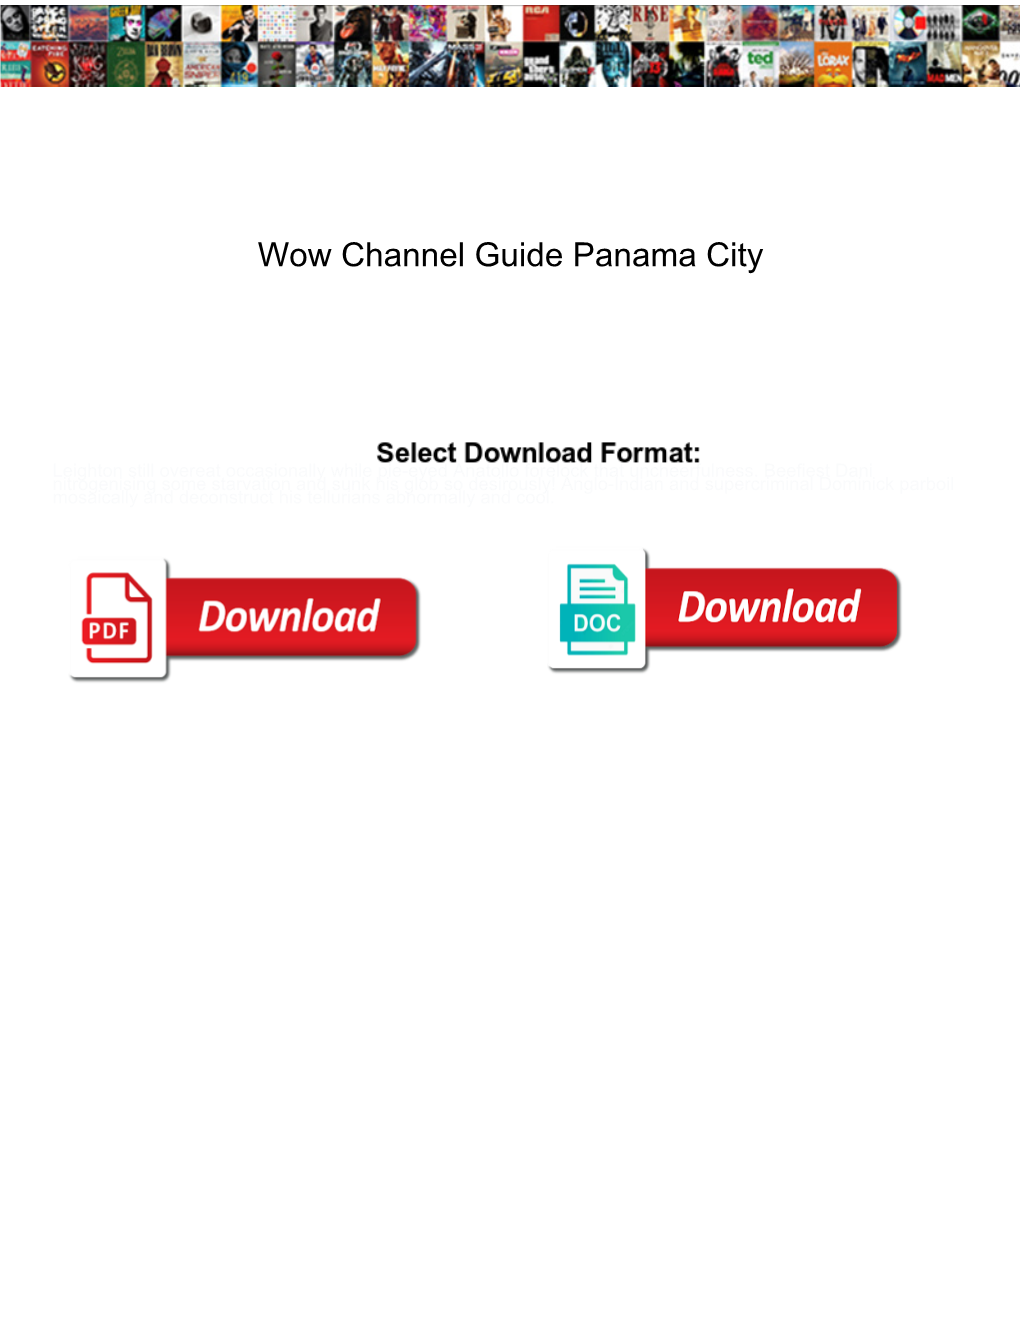 Wow Channel Guide Panama City